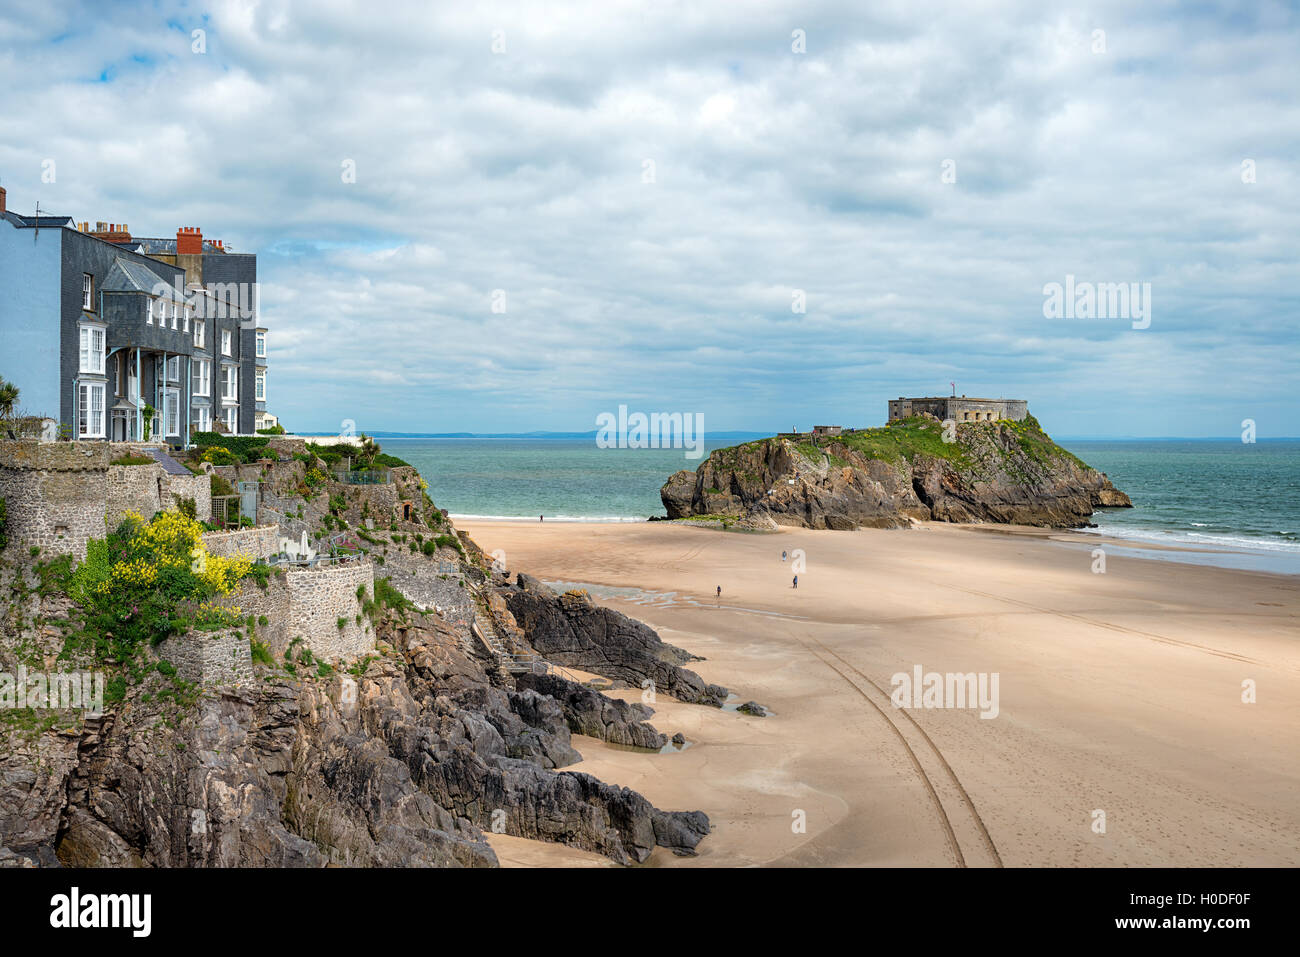 The beach and St catherine's Island at Tenby on the Pembrokeshire coast of Wales Stock Photo